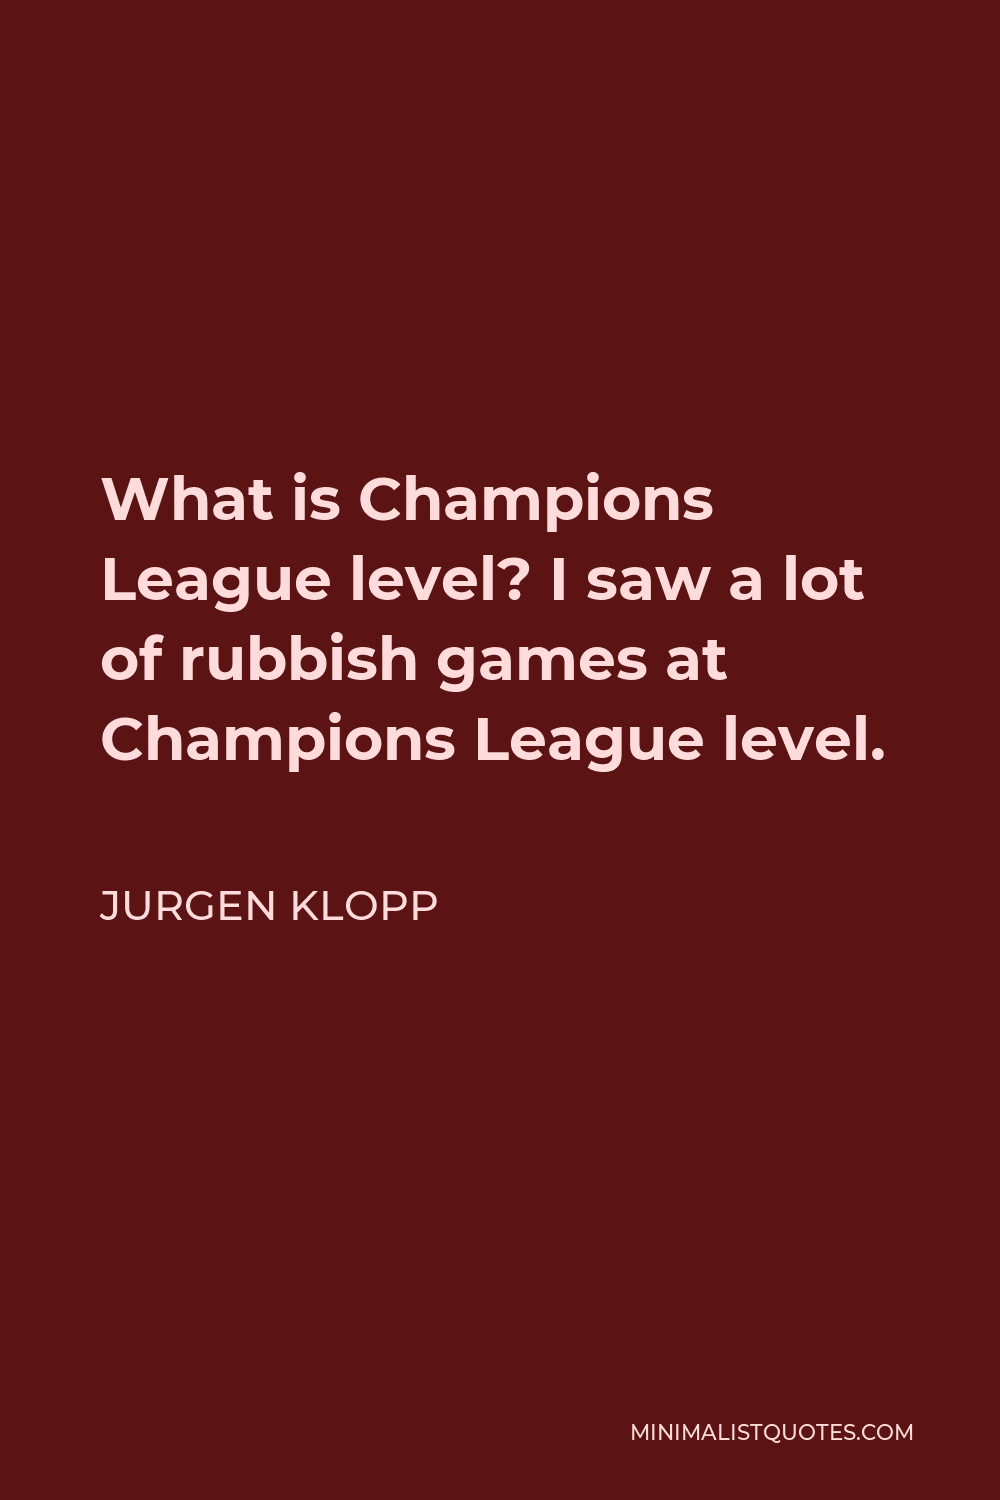 Jurgen Klopp Quote - What is Champions League level? I saw a lot of rubbish games at Champions League level.